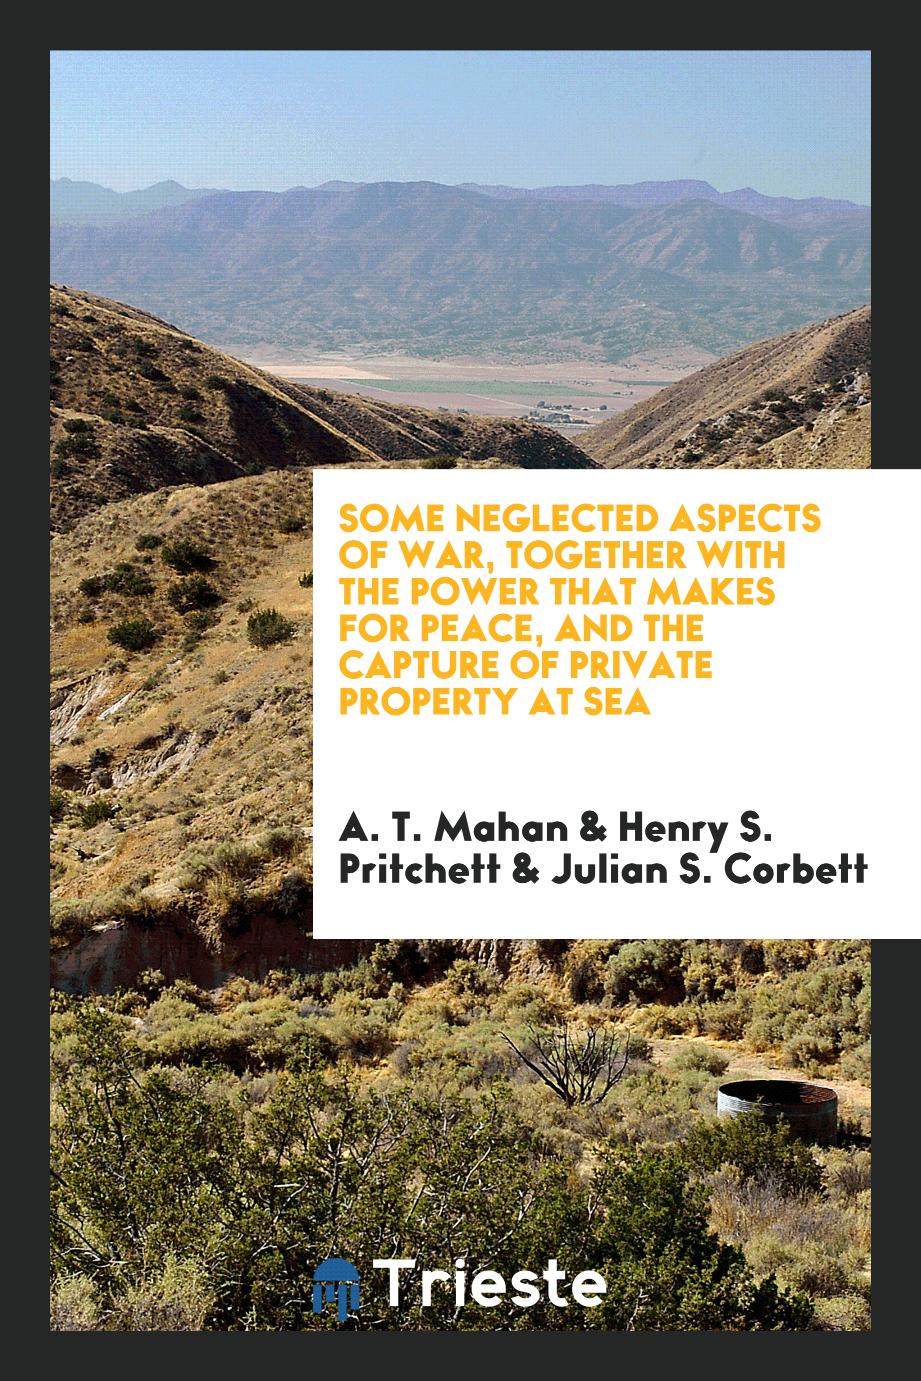 Some neglected aspects of war, together with the power that makes for peace, and the capture of private property at sea